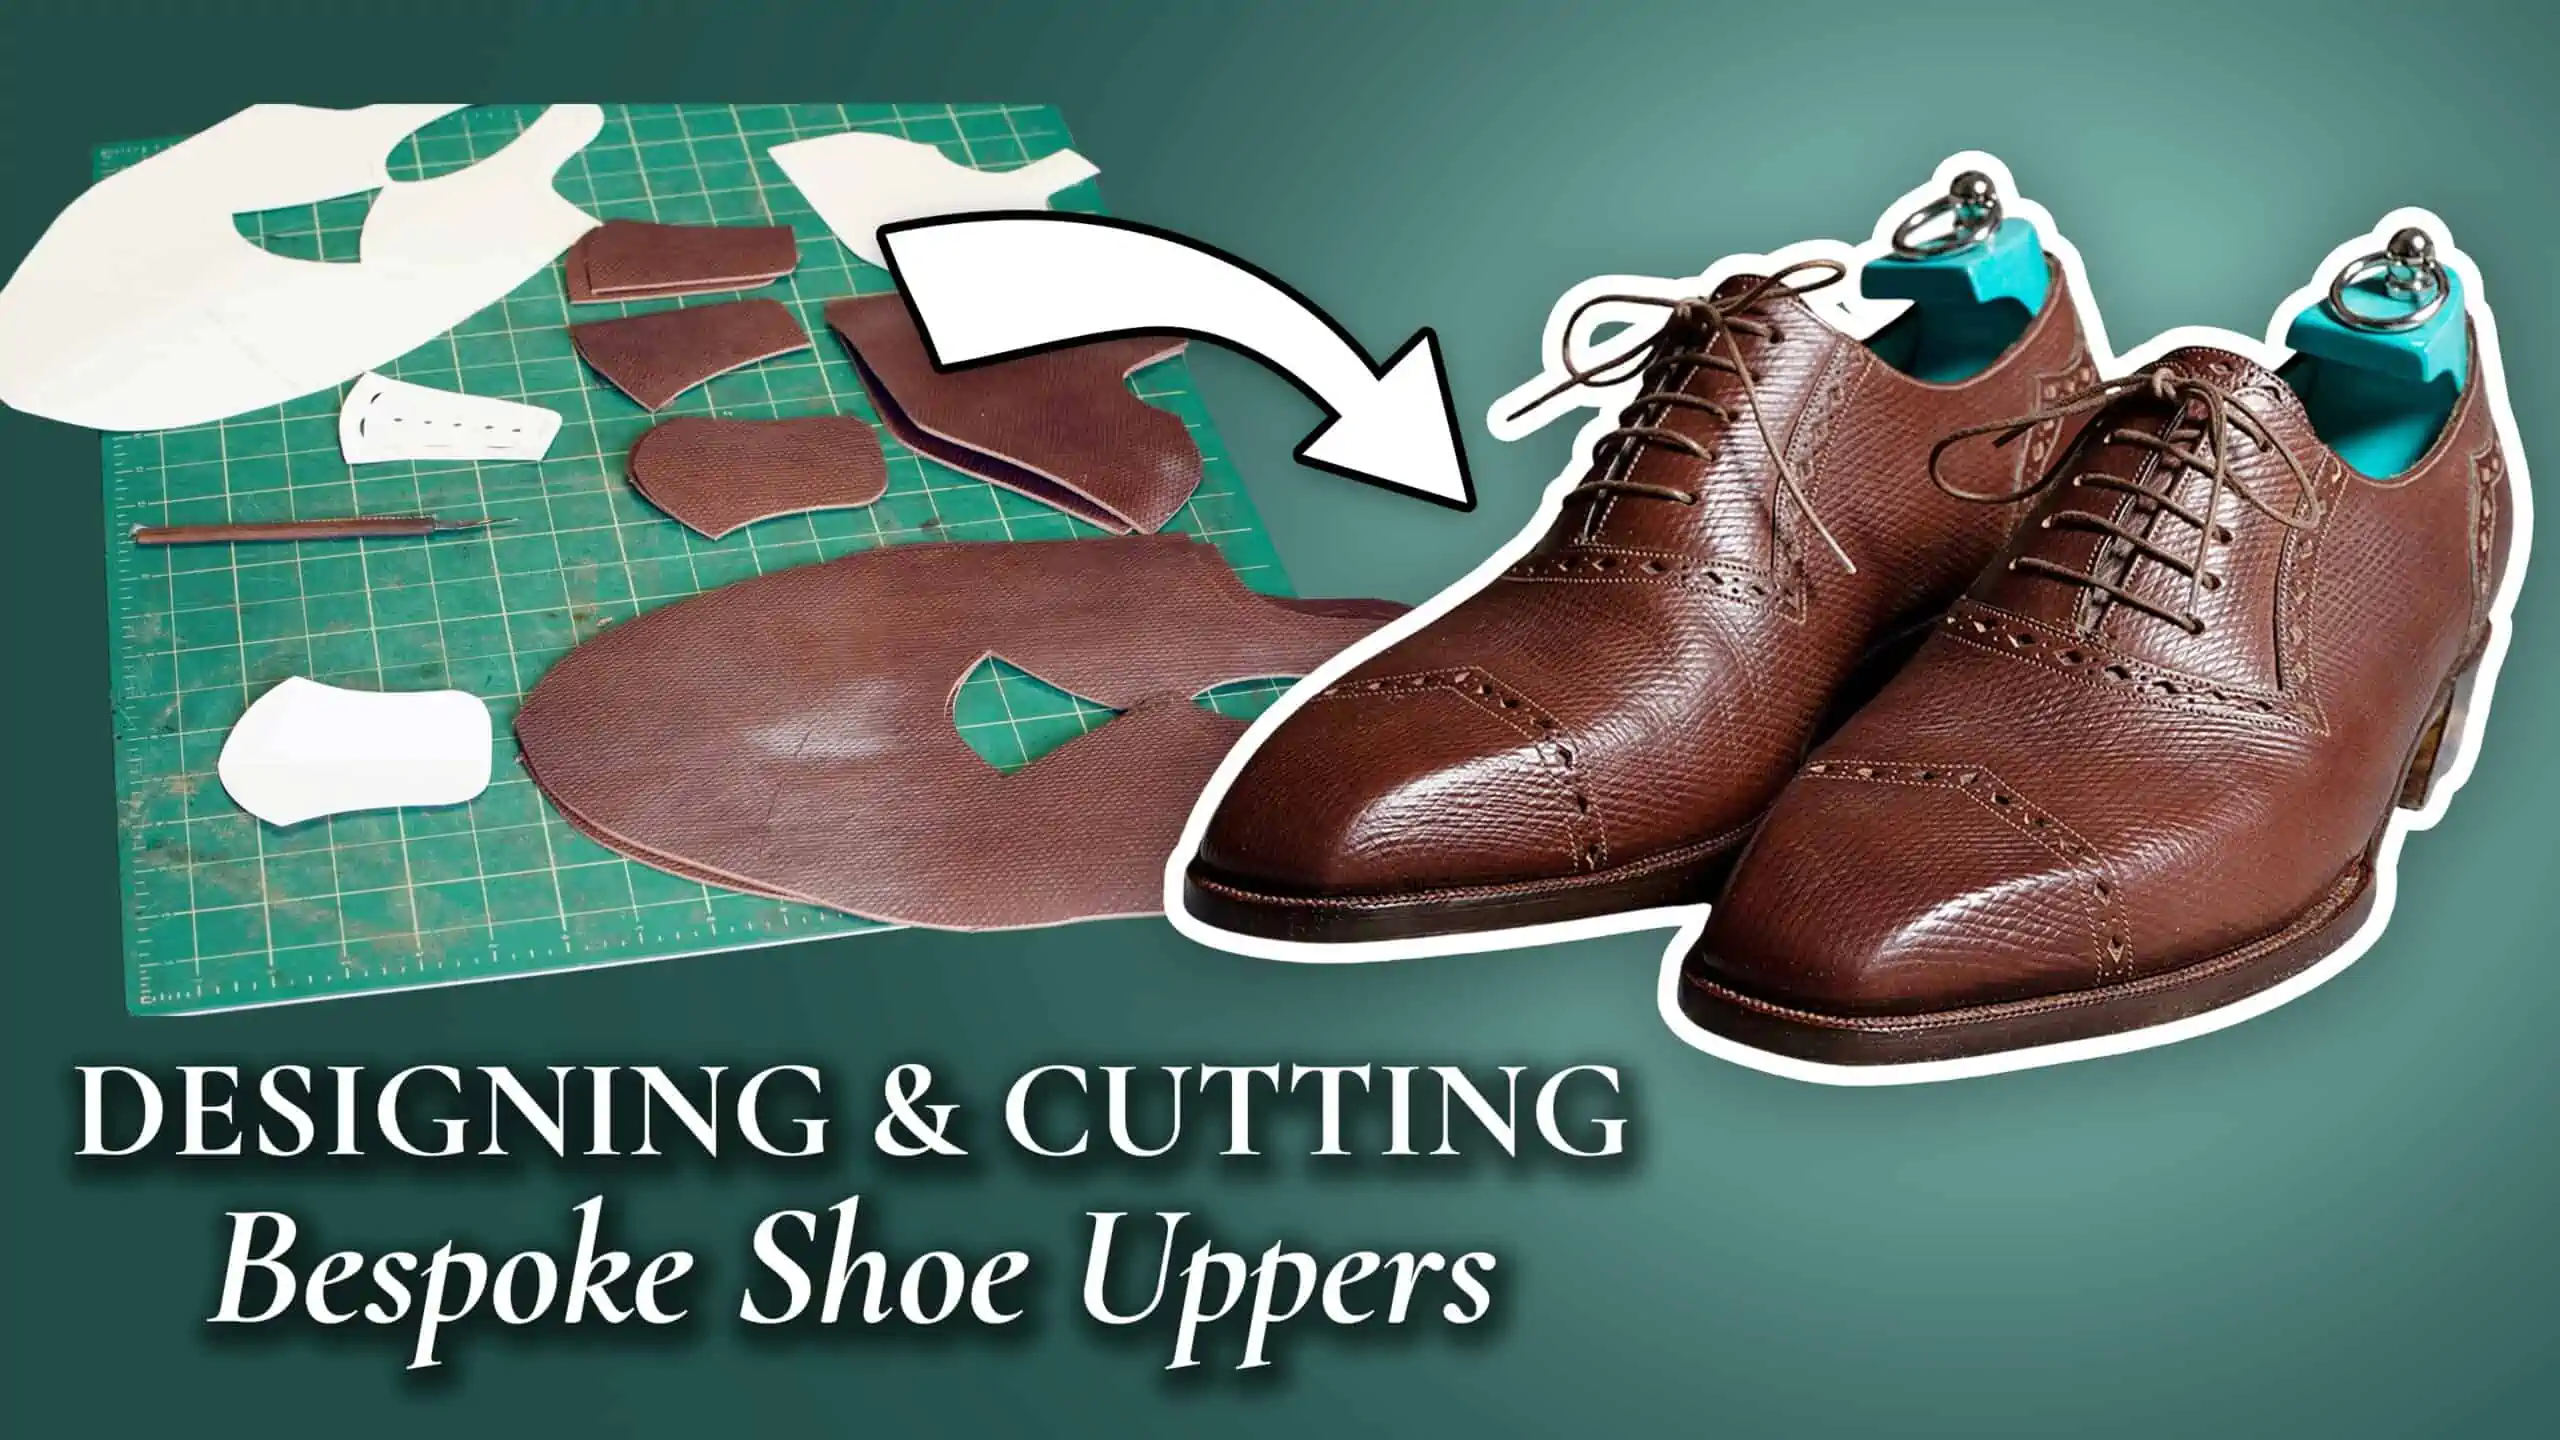 Designing Cutting Bespoke Shoe Uppers 3840x2160.psd scaled